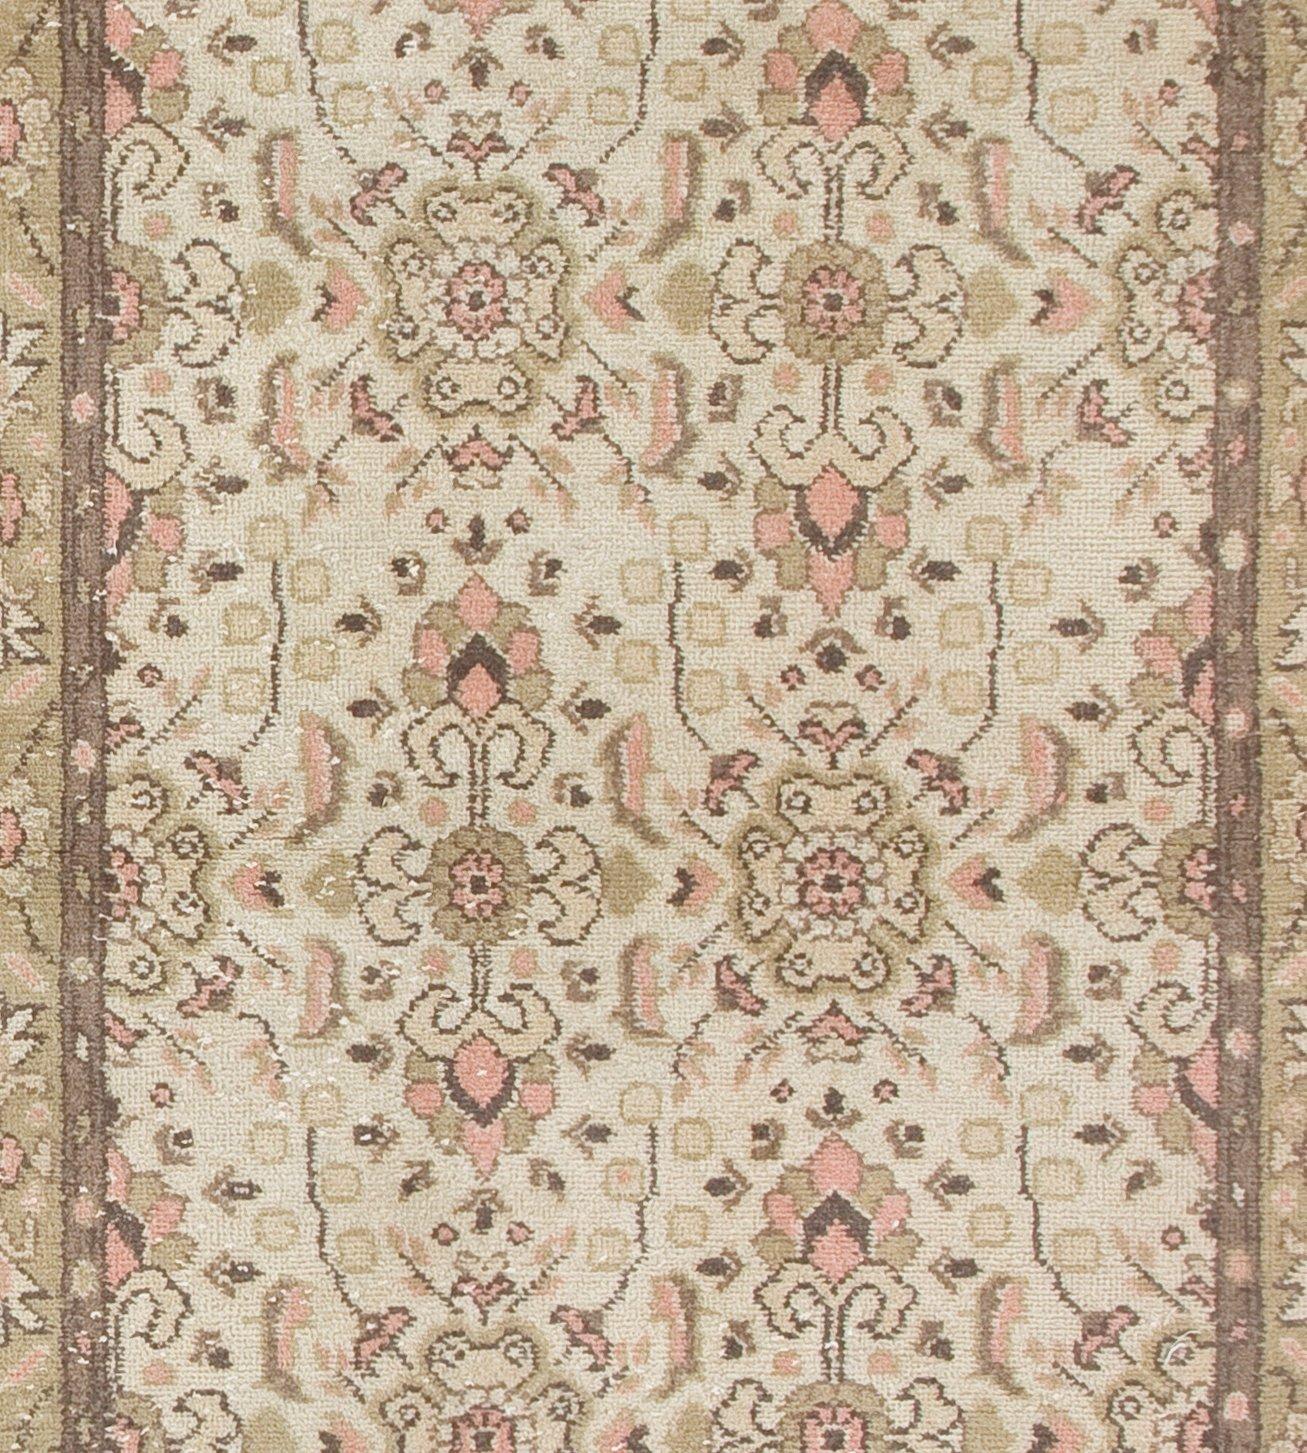 Turkish 3.7x6.8 Ft Vintage Anatolian Wool Rug in Beige, Faded Green, Soft Pink and Brown For Sale